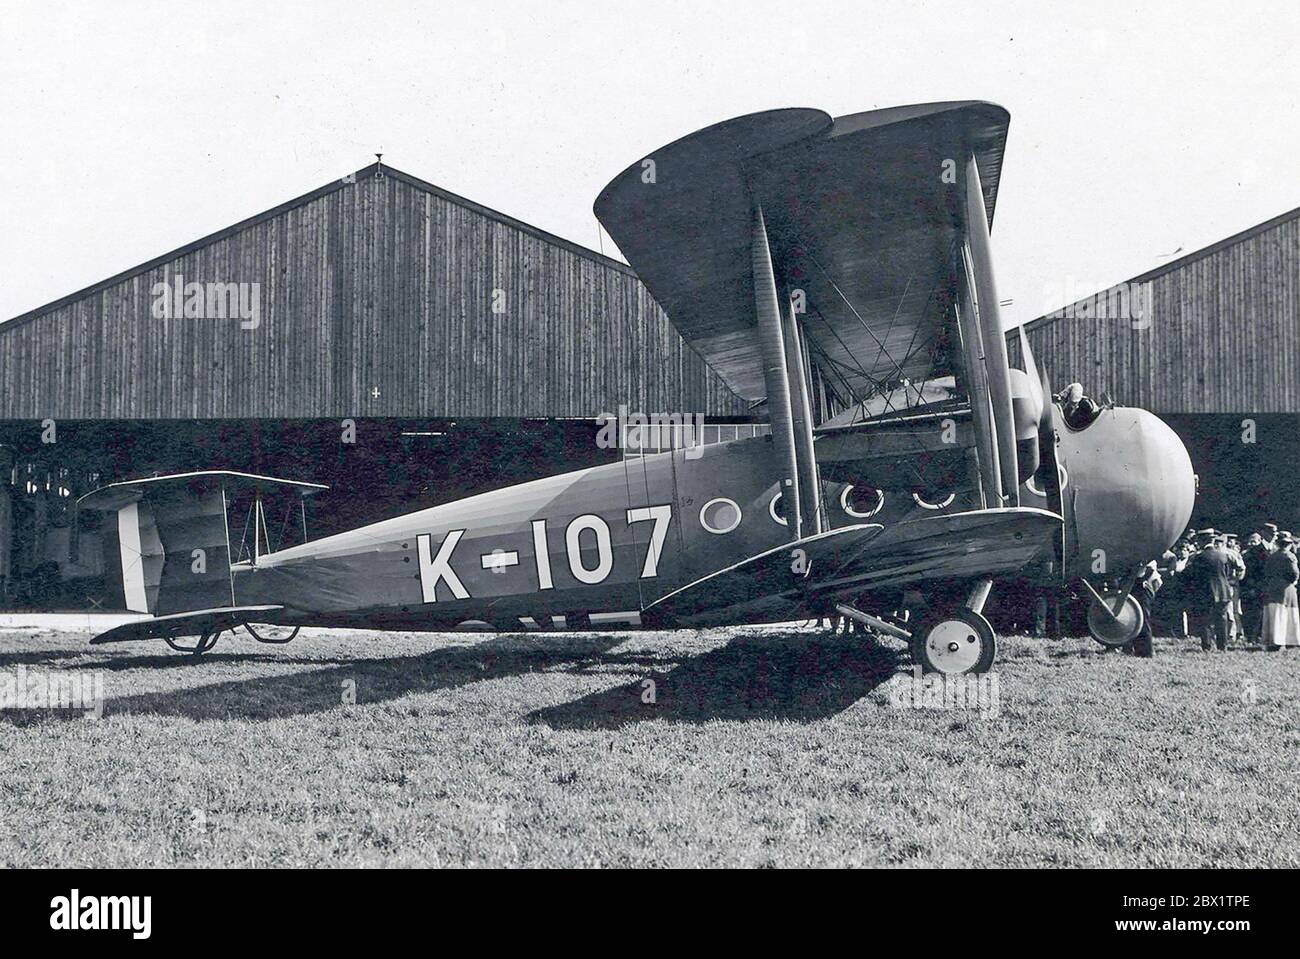 VICKERS VIMY FB-27 COMMERCIAL about 1919. This aircraft - later G-EAAV - was written off after a crash in Tabora, Tanzania on 27 February 1920. Stock Photo